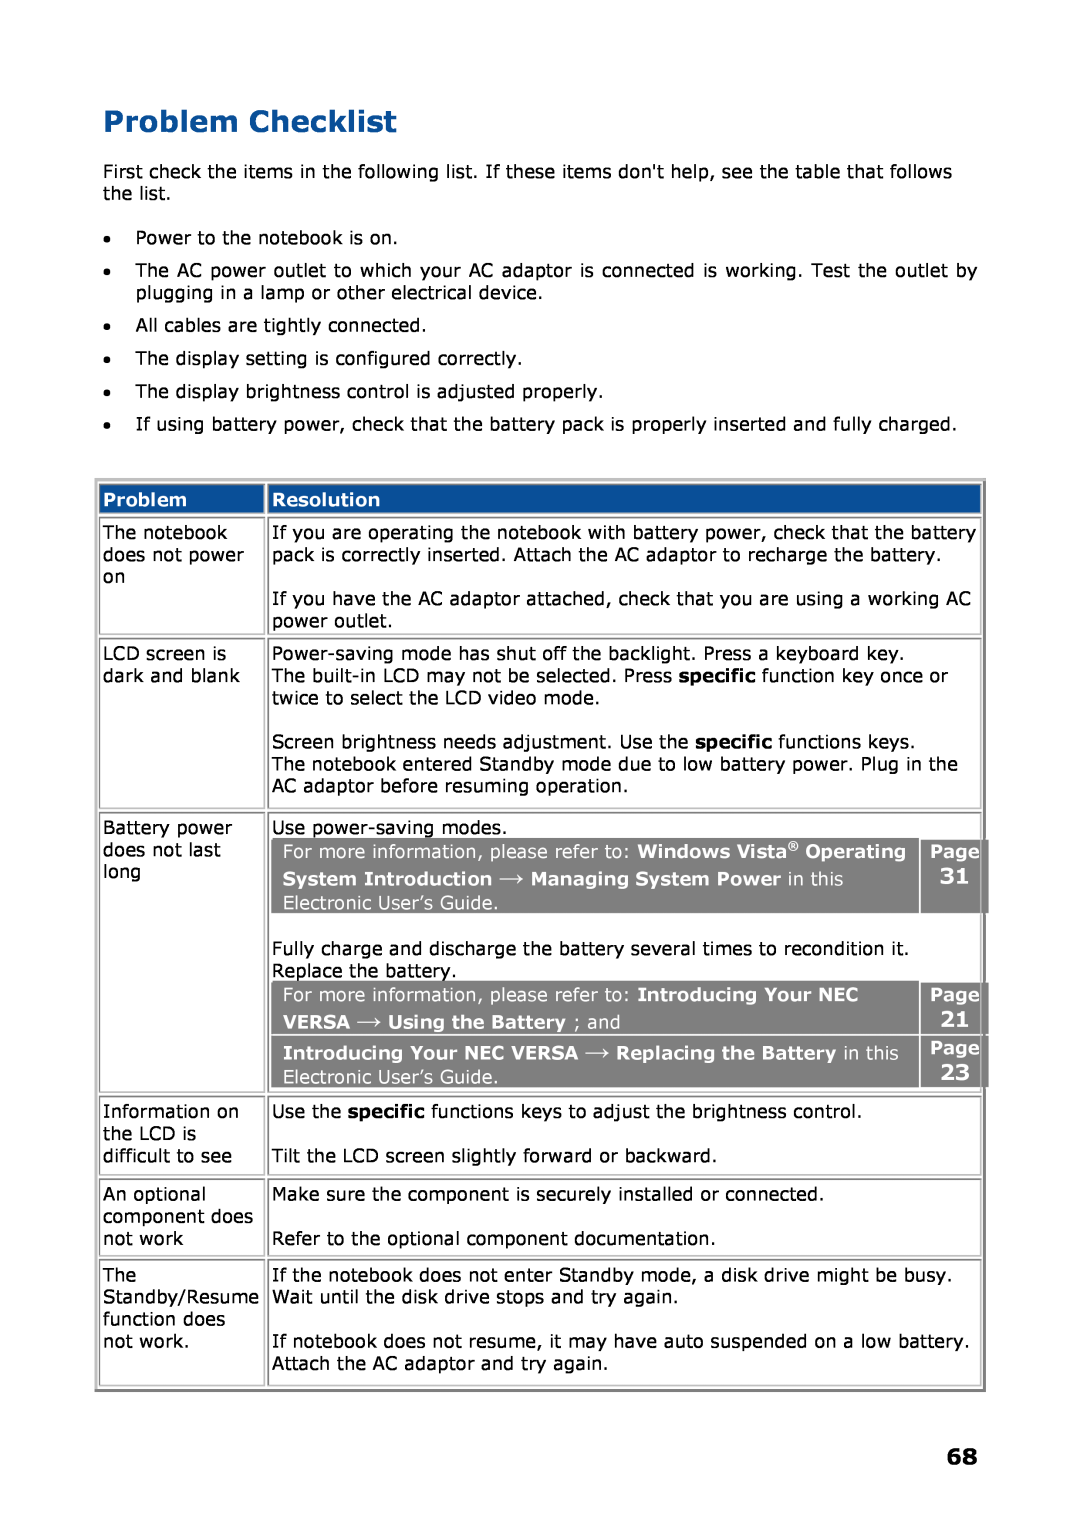 NEC P8510 Problem Checklist, Resolution, Use power-saving modes, System Introduction → Managing System Power in this, Page 